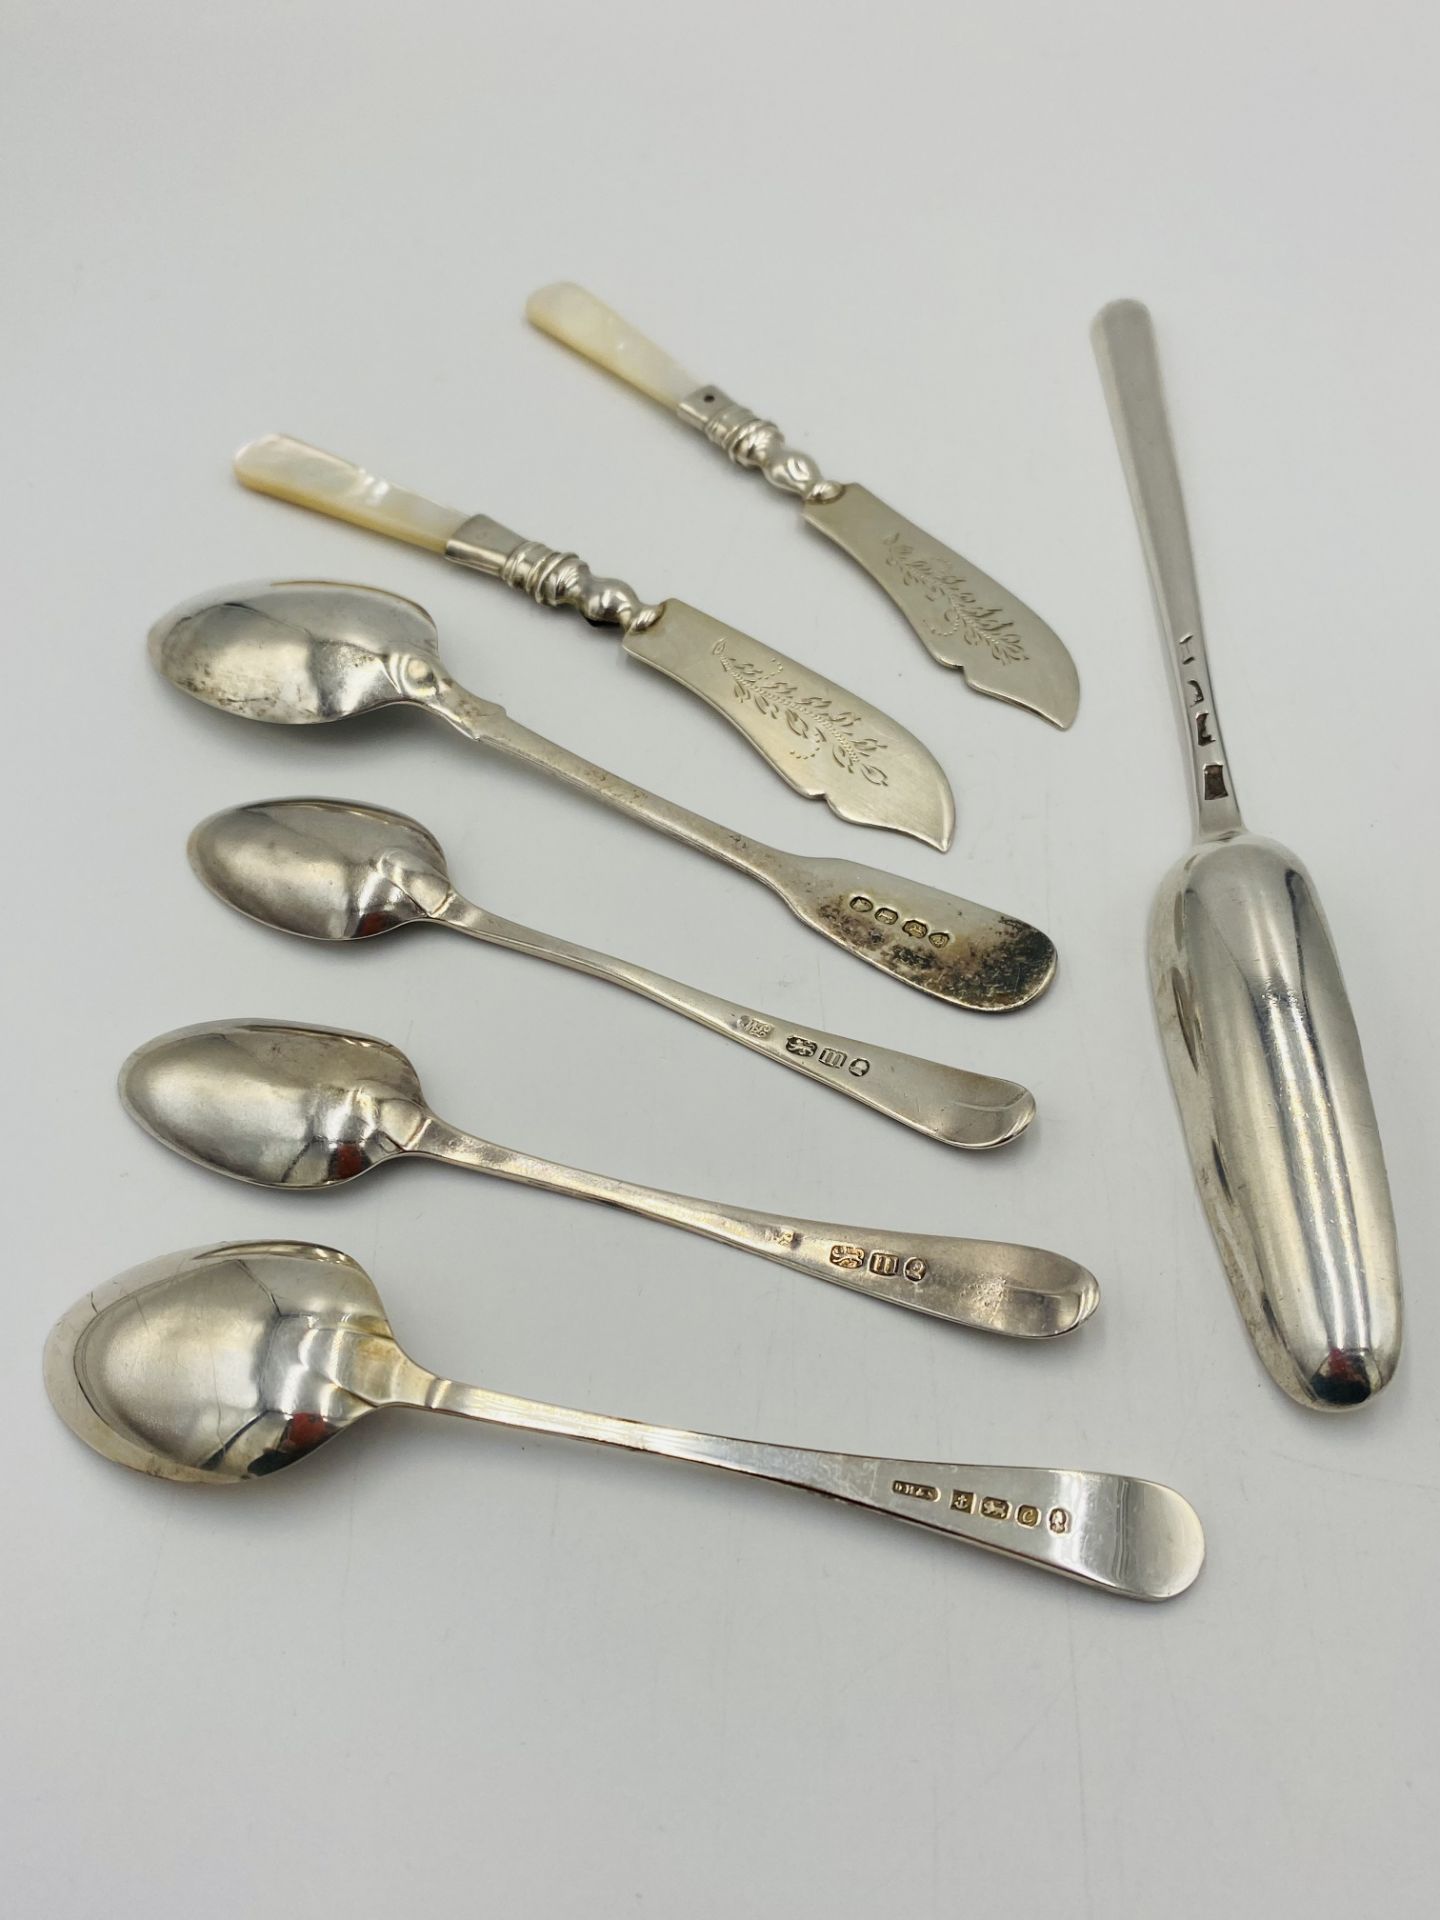 Boxed set of silver spoons and other silver flatware - Image 5 of 5